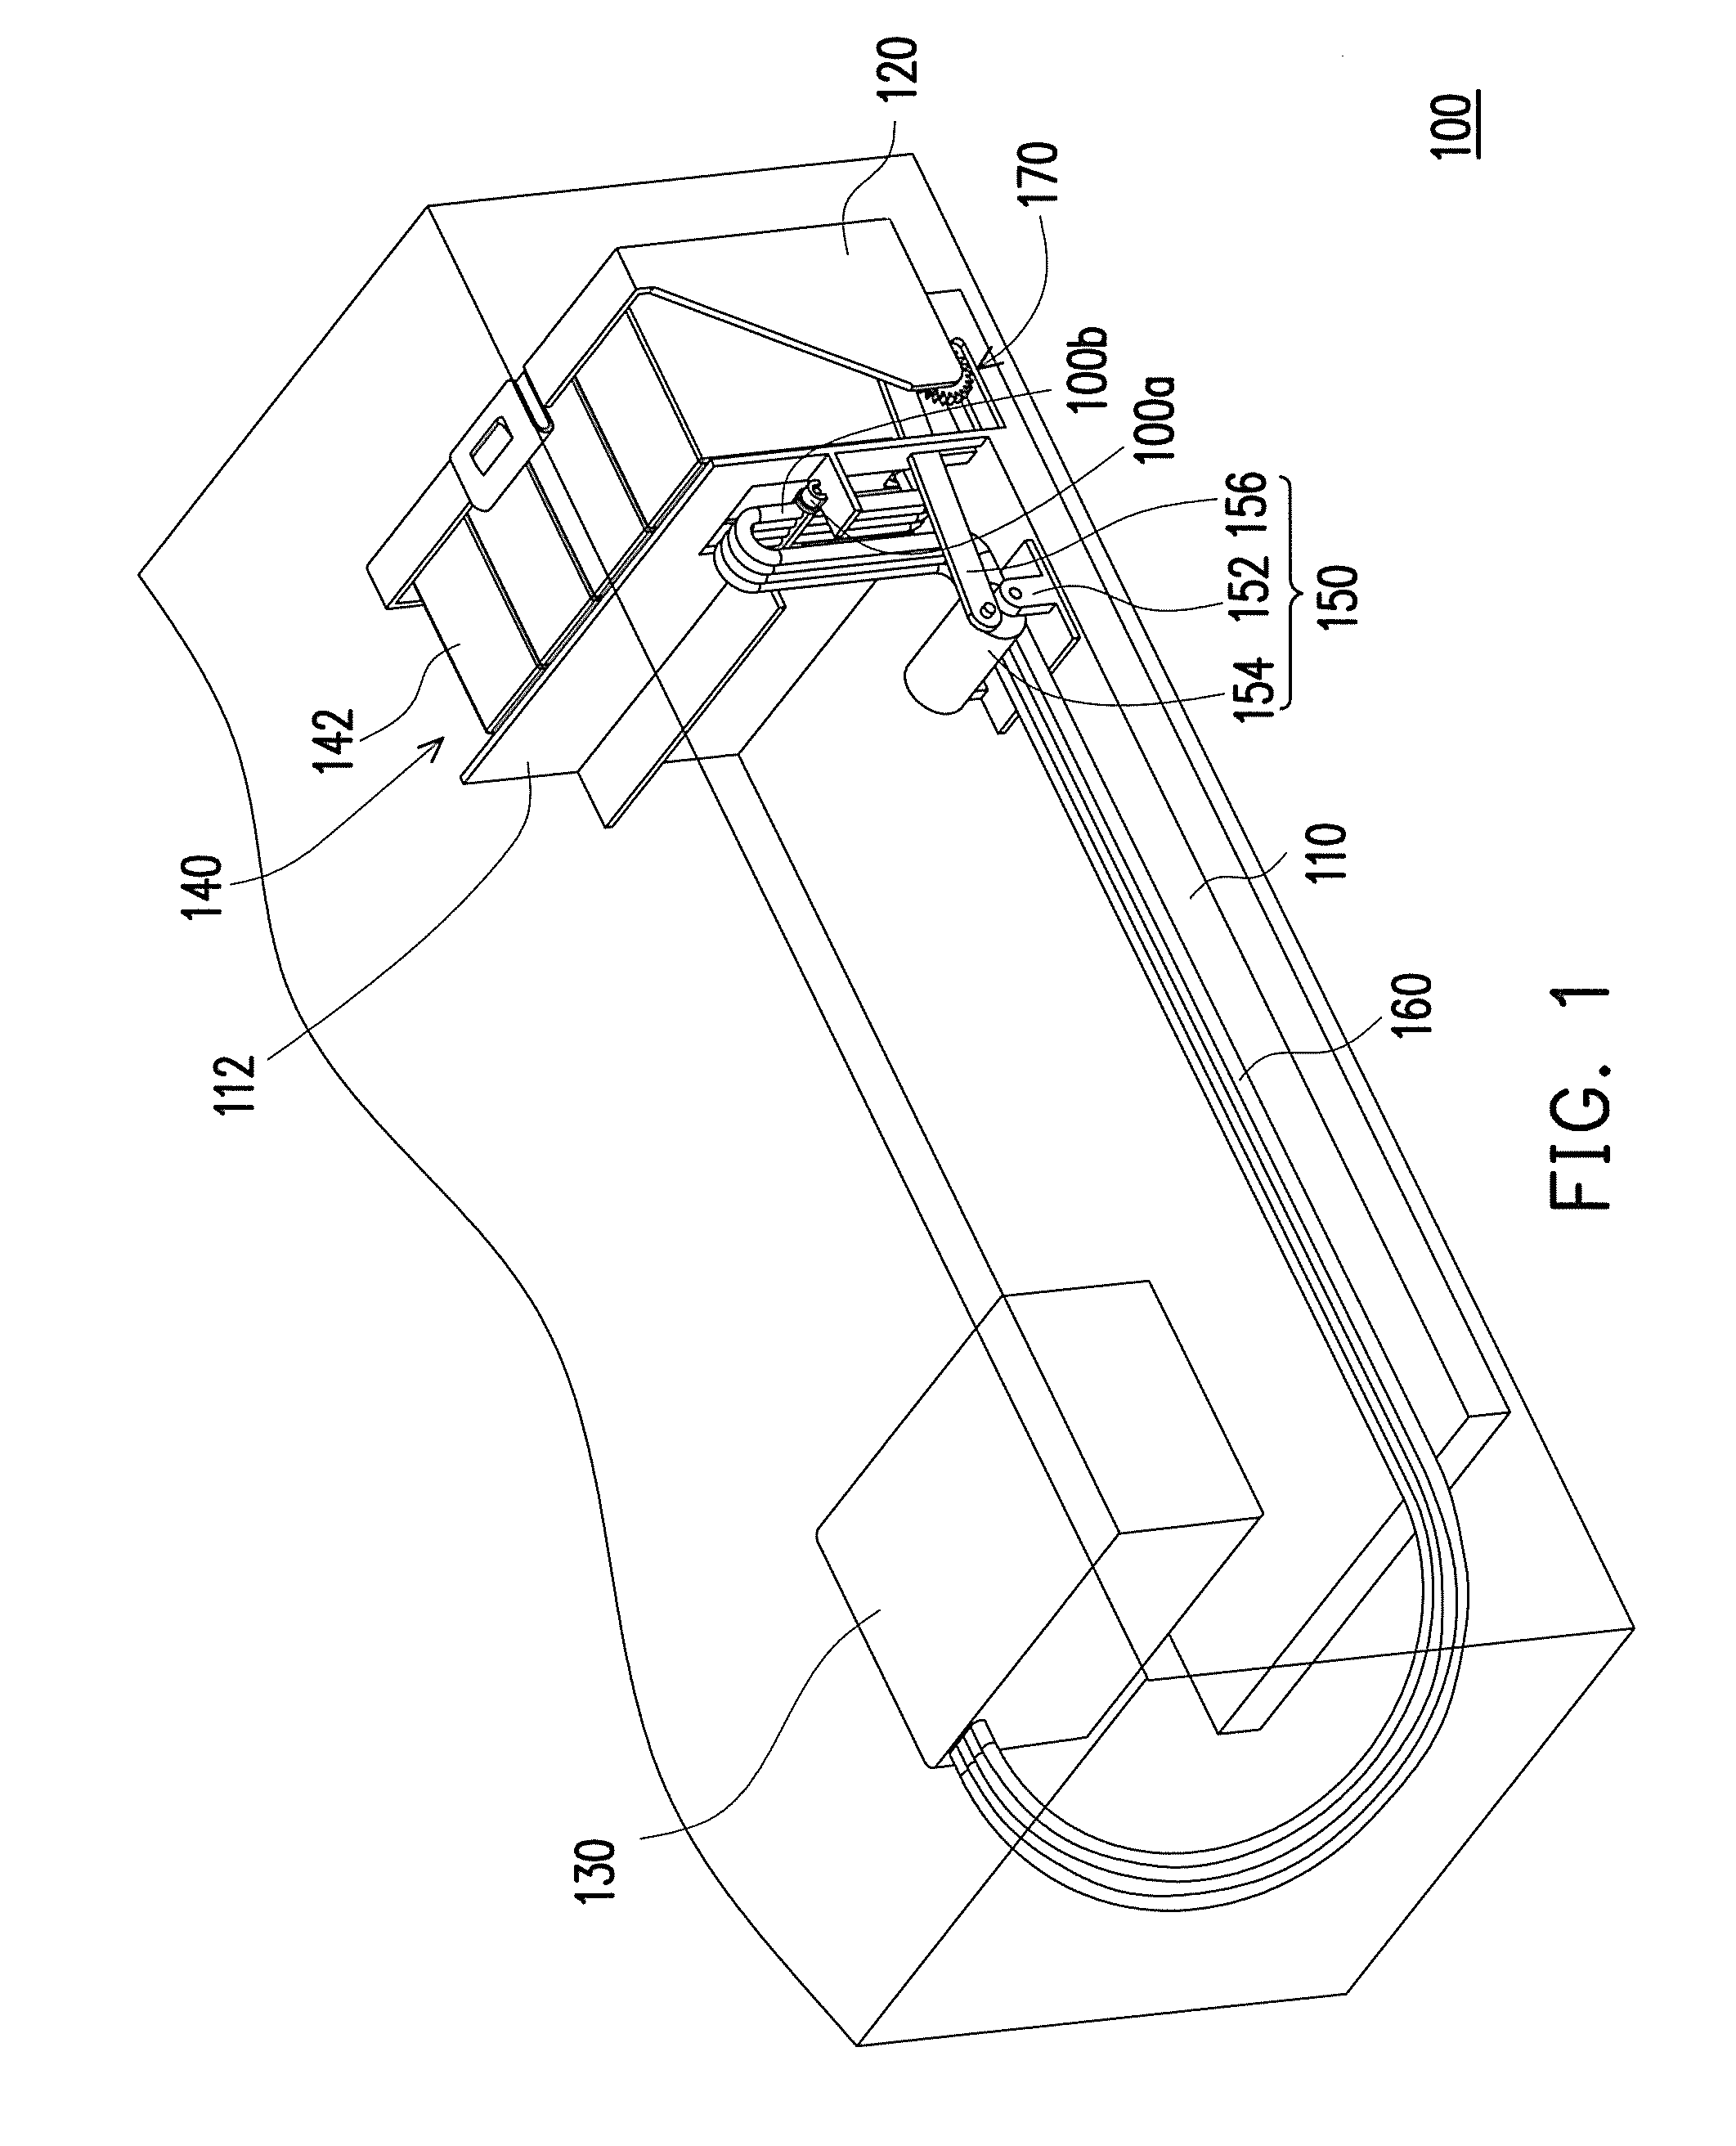 Ink supply system and media recording device